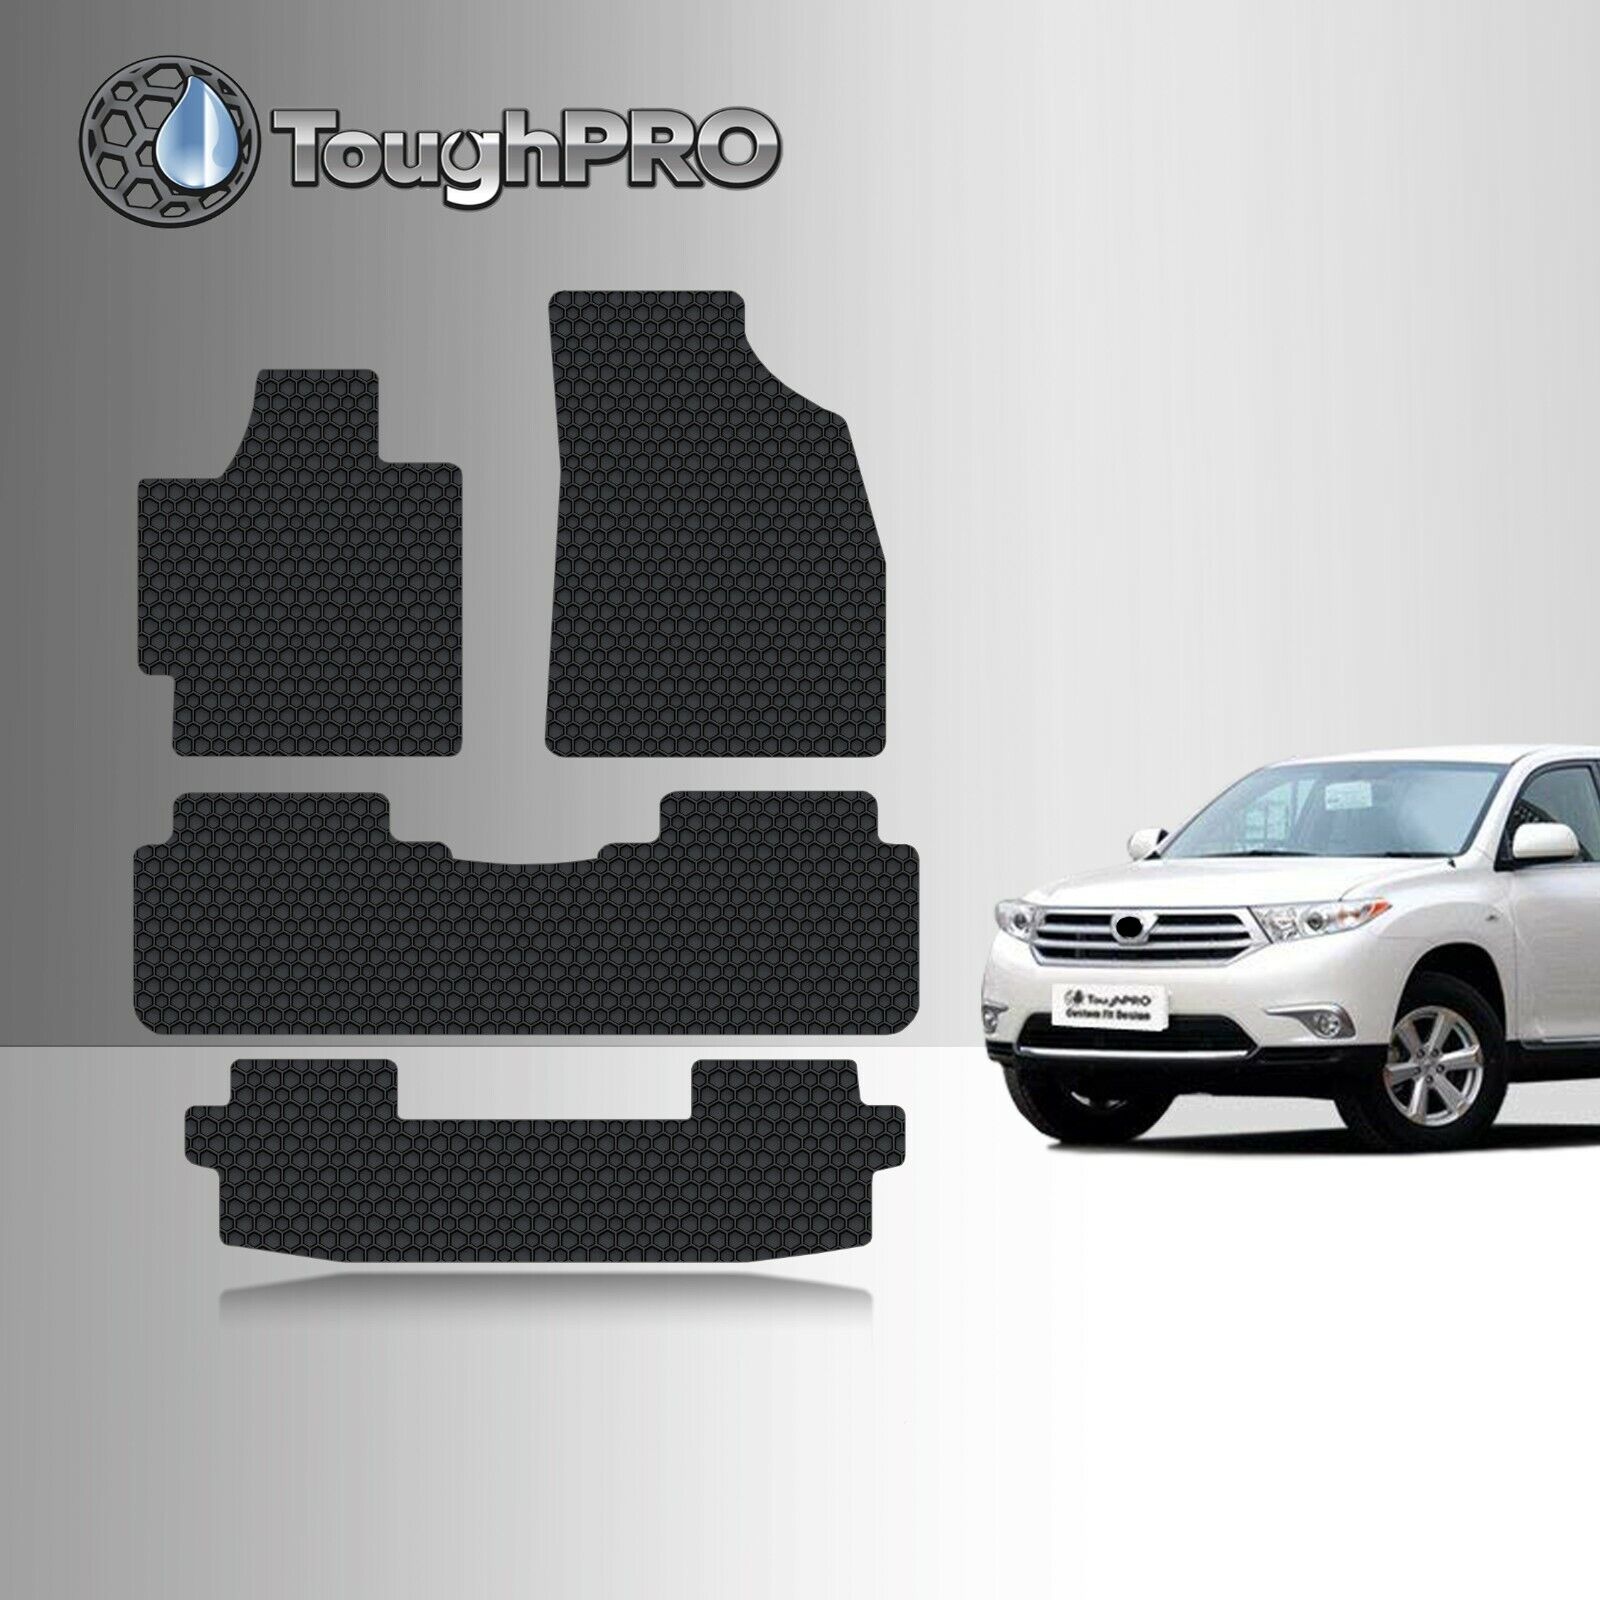 ToughPRO Floor Mats + 3rd Row Black For Toyota Highlander All Weather 2008-2013